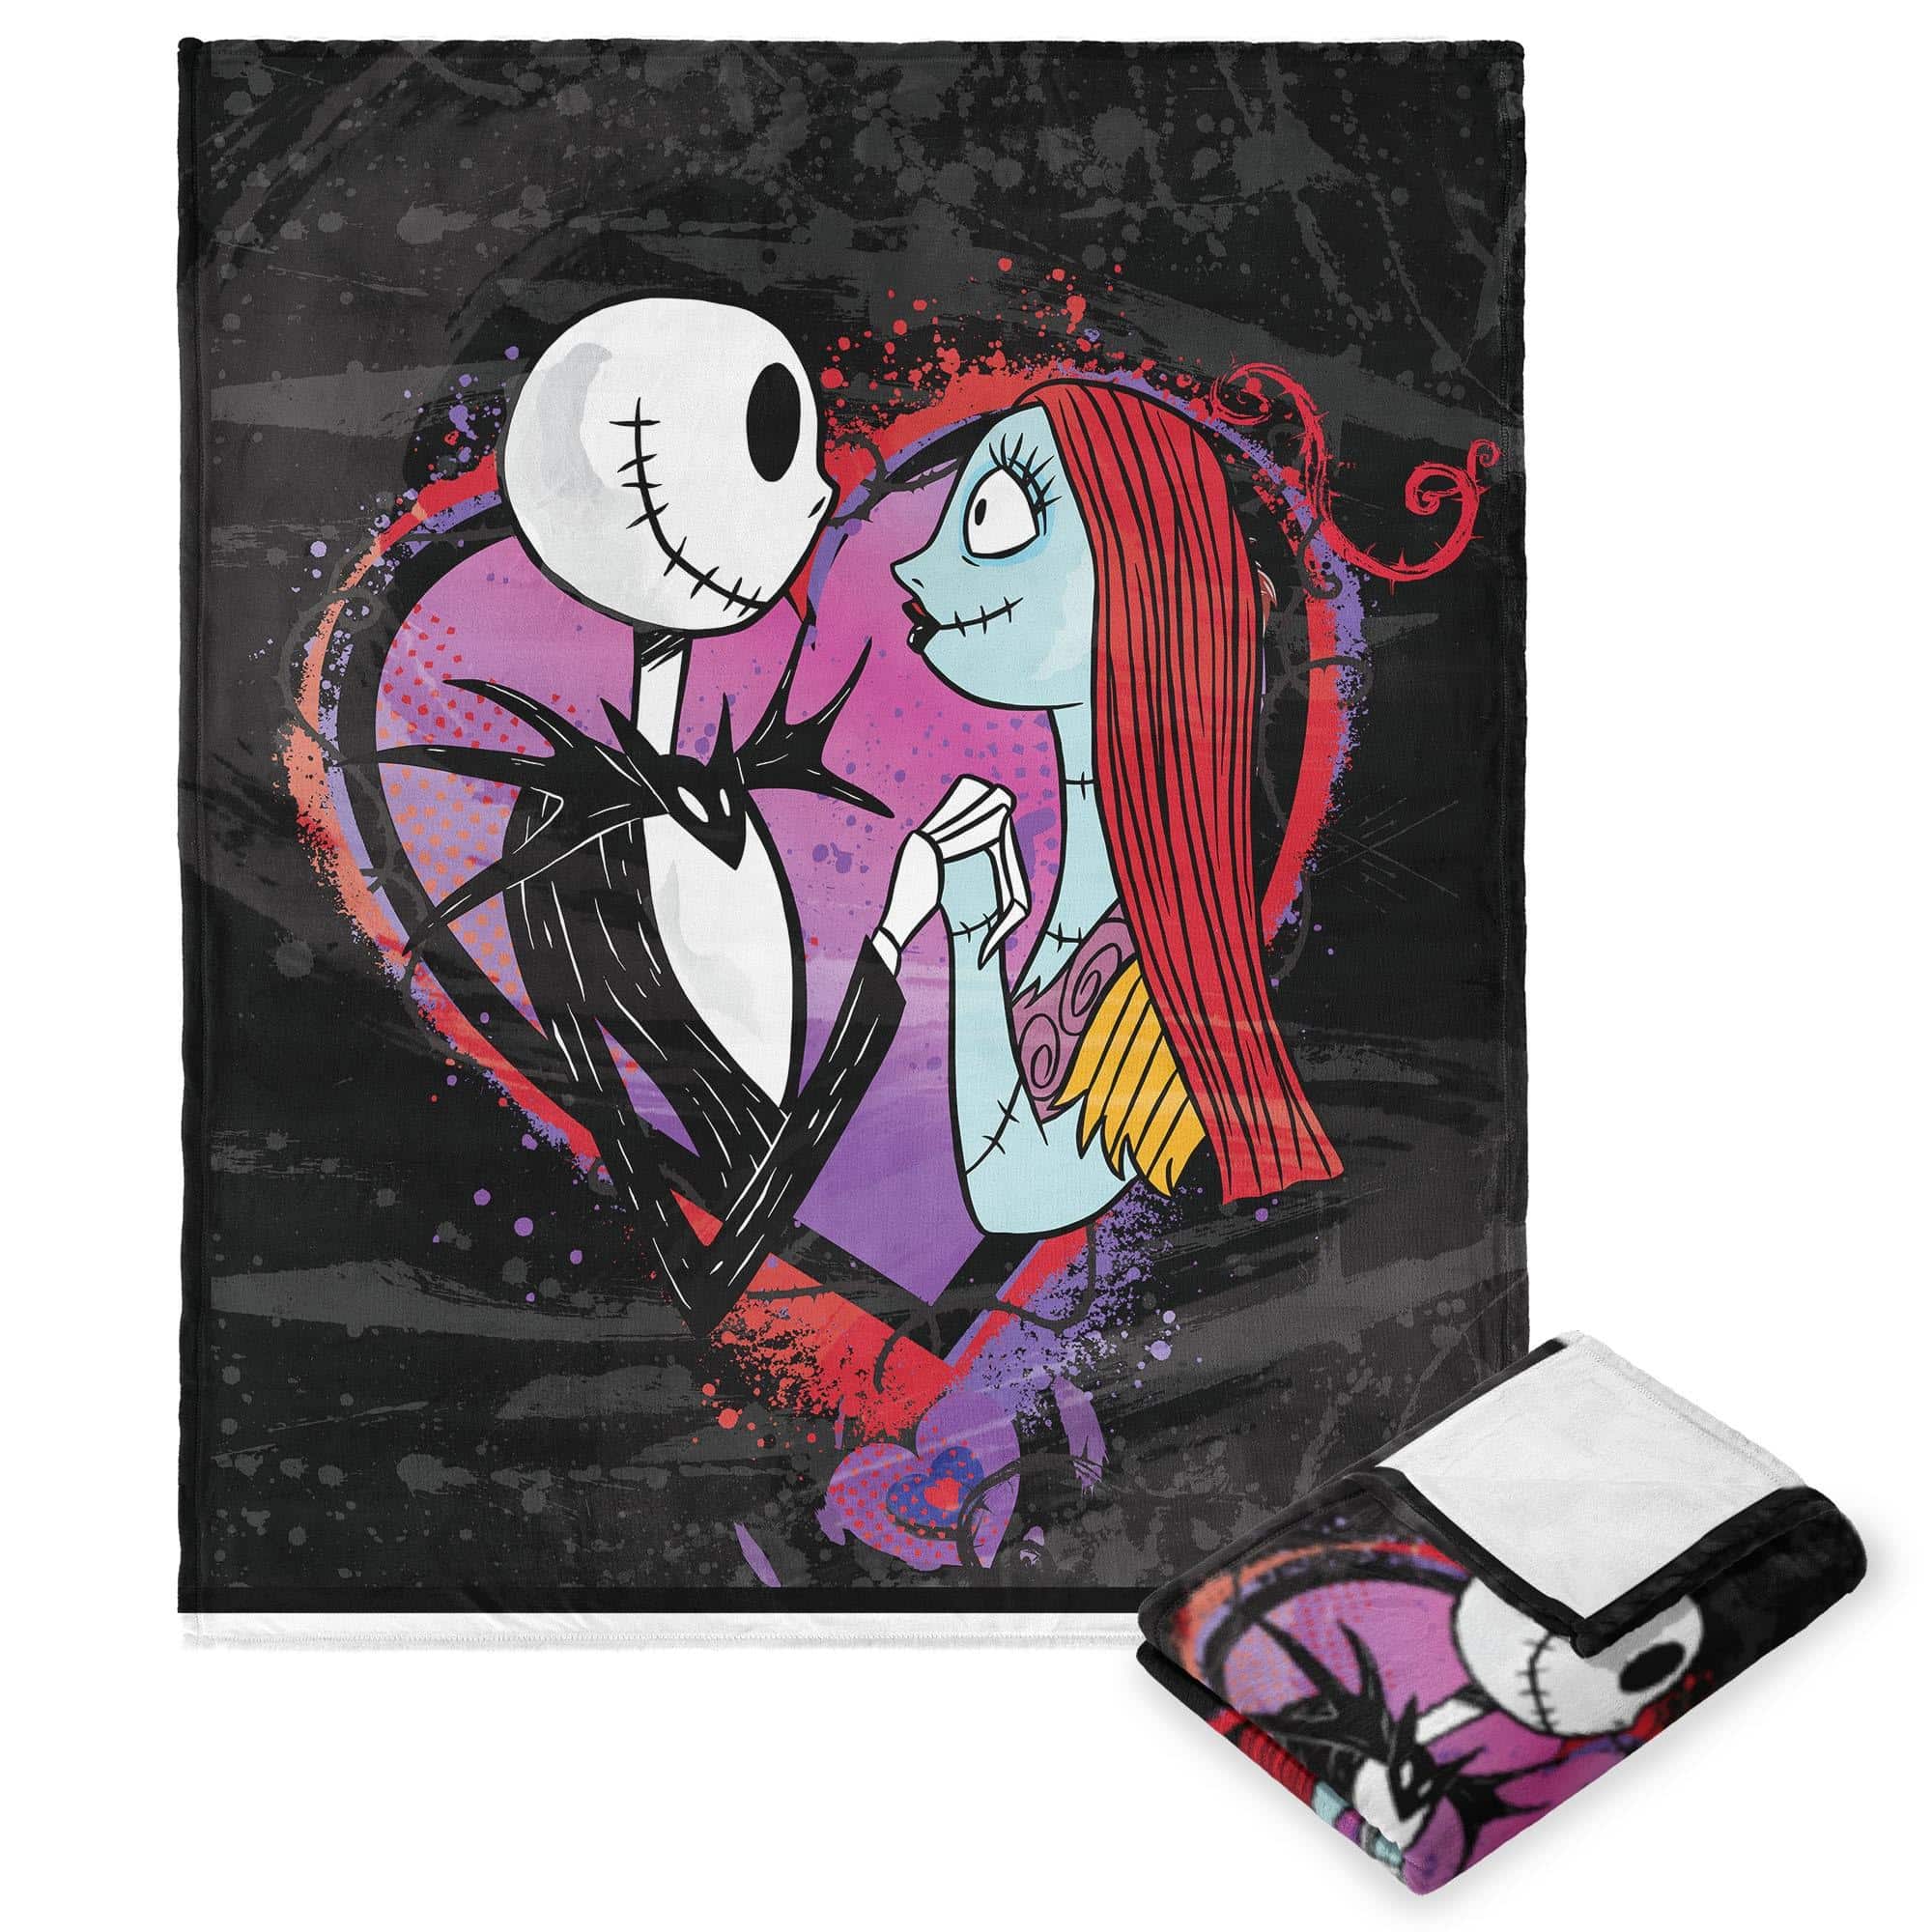 Disney Nightmare Before Christmas Frightful Yet Delightful Silk Touch Throw Blanket 50x60 Inches